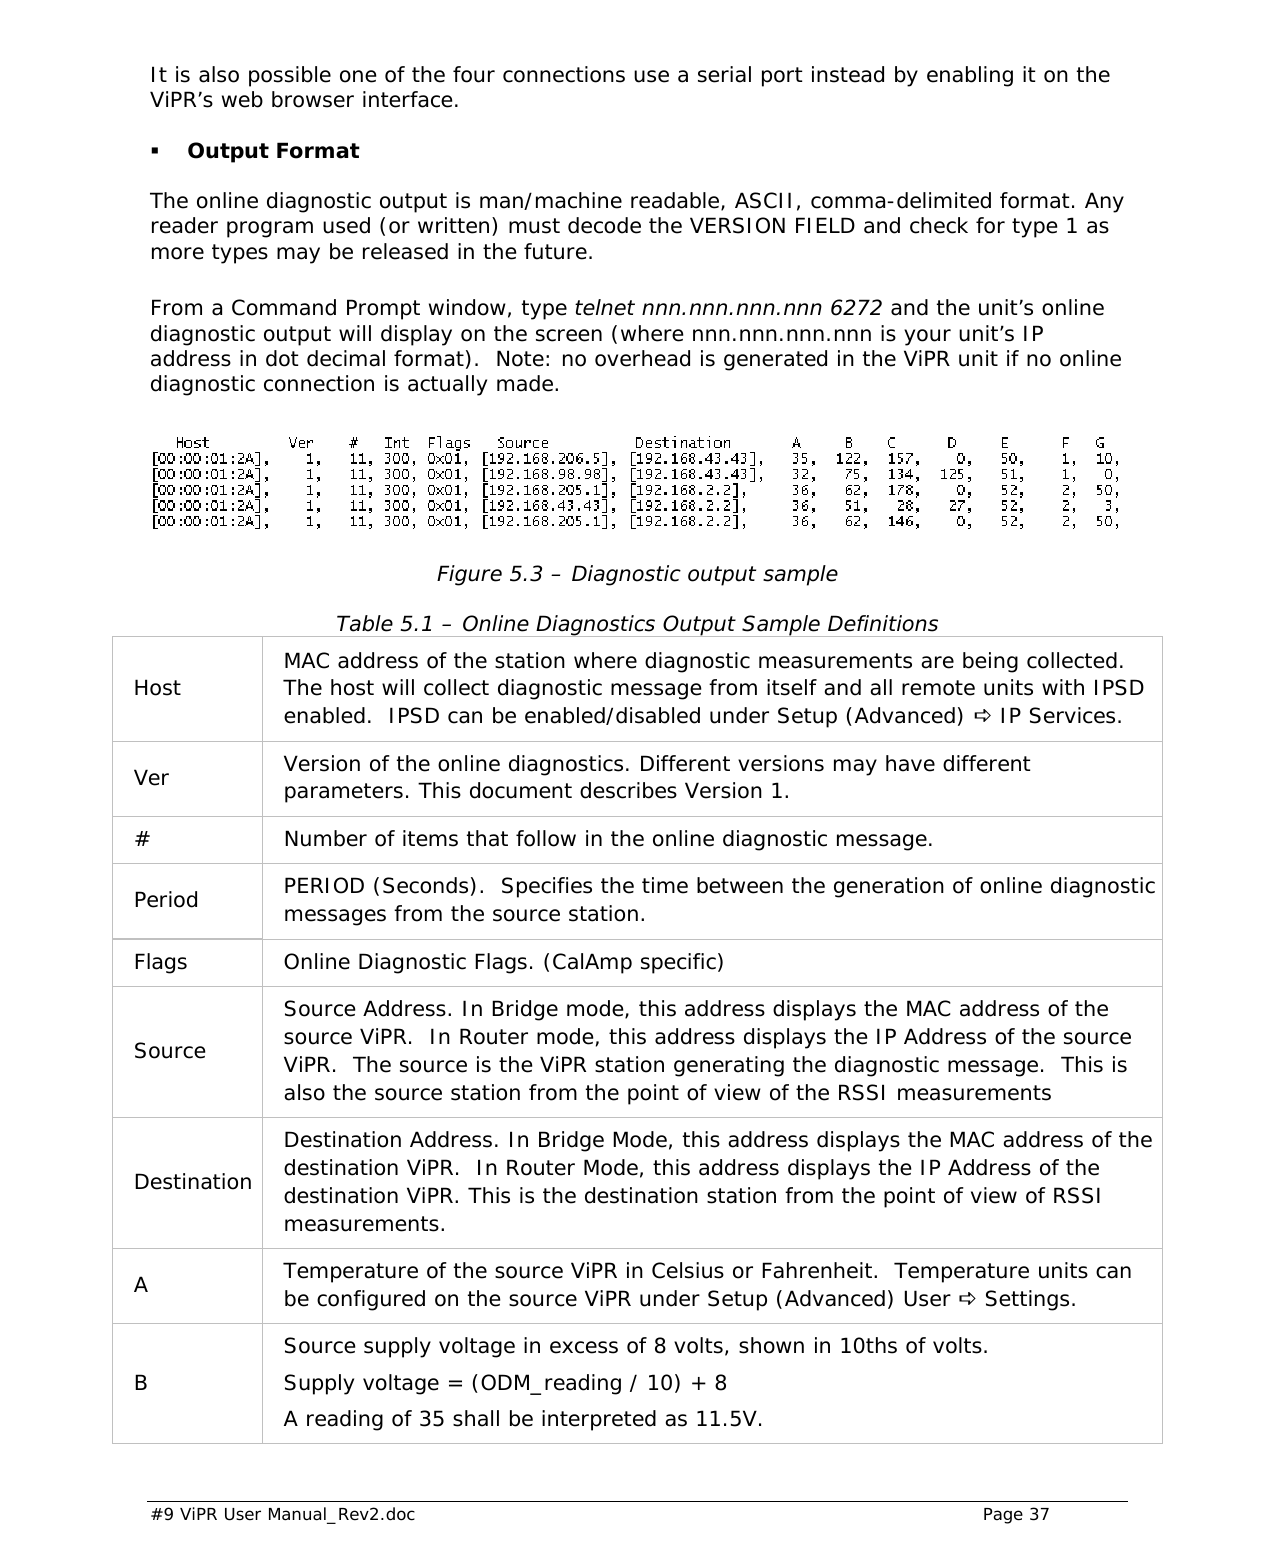  #9 ViPR User Manual_Rev2.doc    Page 37  It is also possible one of the four connections use a serial port instead by enabling it on the ViPR’s web browser interface.   Output Format The online diagnostic output is man/machine readable, ASCII, comma-delimited format. Any reader program used (or written) must decode the VERSION FIELD and check for type 1 as more types may be released in the future.   From a Command Prompt window, type telnet nnn.nnn.nnn.nnn 6272 and the unit’s online diagnostic output will display on the screen (where nnn.nnn.nnn.nnn is your unit’s IP address in dot decimal format).  Note: no overhead is generated in the ViPR unit if no online diagnostic connection is actually made.   Figure 5.3 – Diagnostic output sample Table 5.1 – Online Diagnostics Output Sample Definitions Host  MAC address of the station where diagnostic measurements are being collected.  The host will collect diagnostic message from itself and all remote units with IPSD enabled.  IPSD can be enabled/disabled under Setup (Advanced) D IP Services.  Ver  Version of the online diagnostics. Different versions may have different parameters. This document describes Version 1.  #  Number of items that follow in the online diagnostic message. Period  PERIOD (Seconds).  Specifies the time between the generation of online diagnostic messages from the source station. Flags  Online Diagnostic Flags. (CalAmp specific) Source Source Address. In Bridge mode, this address displays the MAC address of the source ViPR.  In Router mode, this address displays the IP Address of the source ViPR.  The source is the ViPR station generating the diagnostic message.  This is also the source station from the point of view of the RSSI measurements Destination Destination Address. In Bridge Mode, this address displays the MAC address of the destination ViPR.  In Router Mode, this address displays the IP Address of the destination ViPR. This is the destination station from the point of view of RSSI measurements. A  Temperature of the source ViPR in Celsius or Fahrenheit.  Temperature units can be configured on the source ViPR under Setup (Advanced) User D Settings. B Source supply voltage in excess of 8 volts, shown in 10ths of volts.  Supply voltage = (ODM_reading / 10) + 8 A reading of 35 shall be interpreted as 11.5V. 